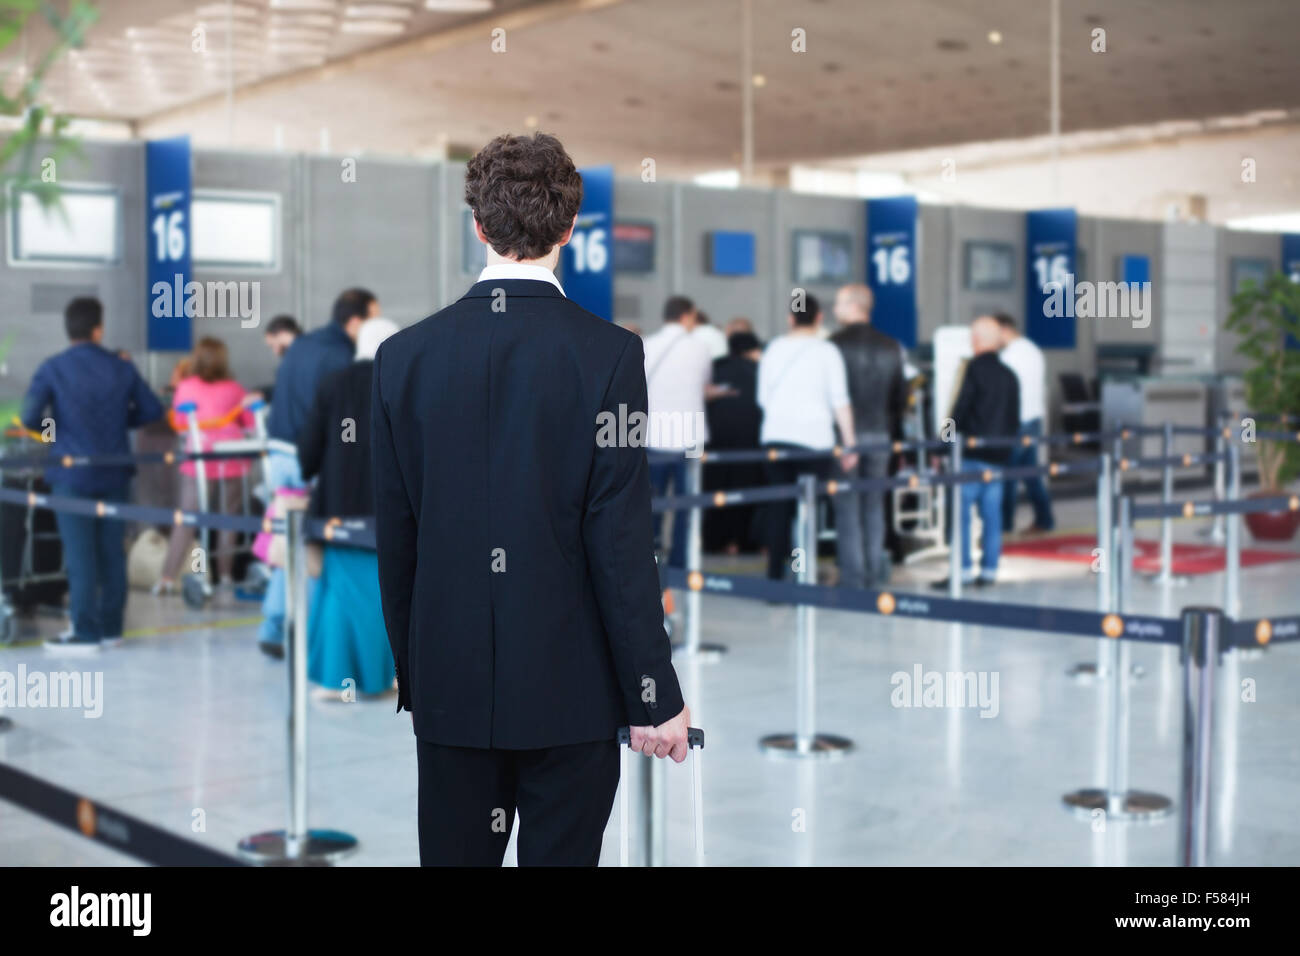 people at the airport, passenger waiting in queue to check in and drop off luggage Stock Photo